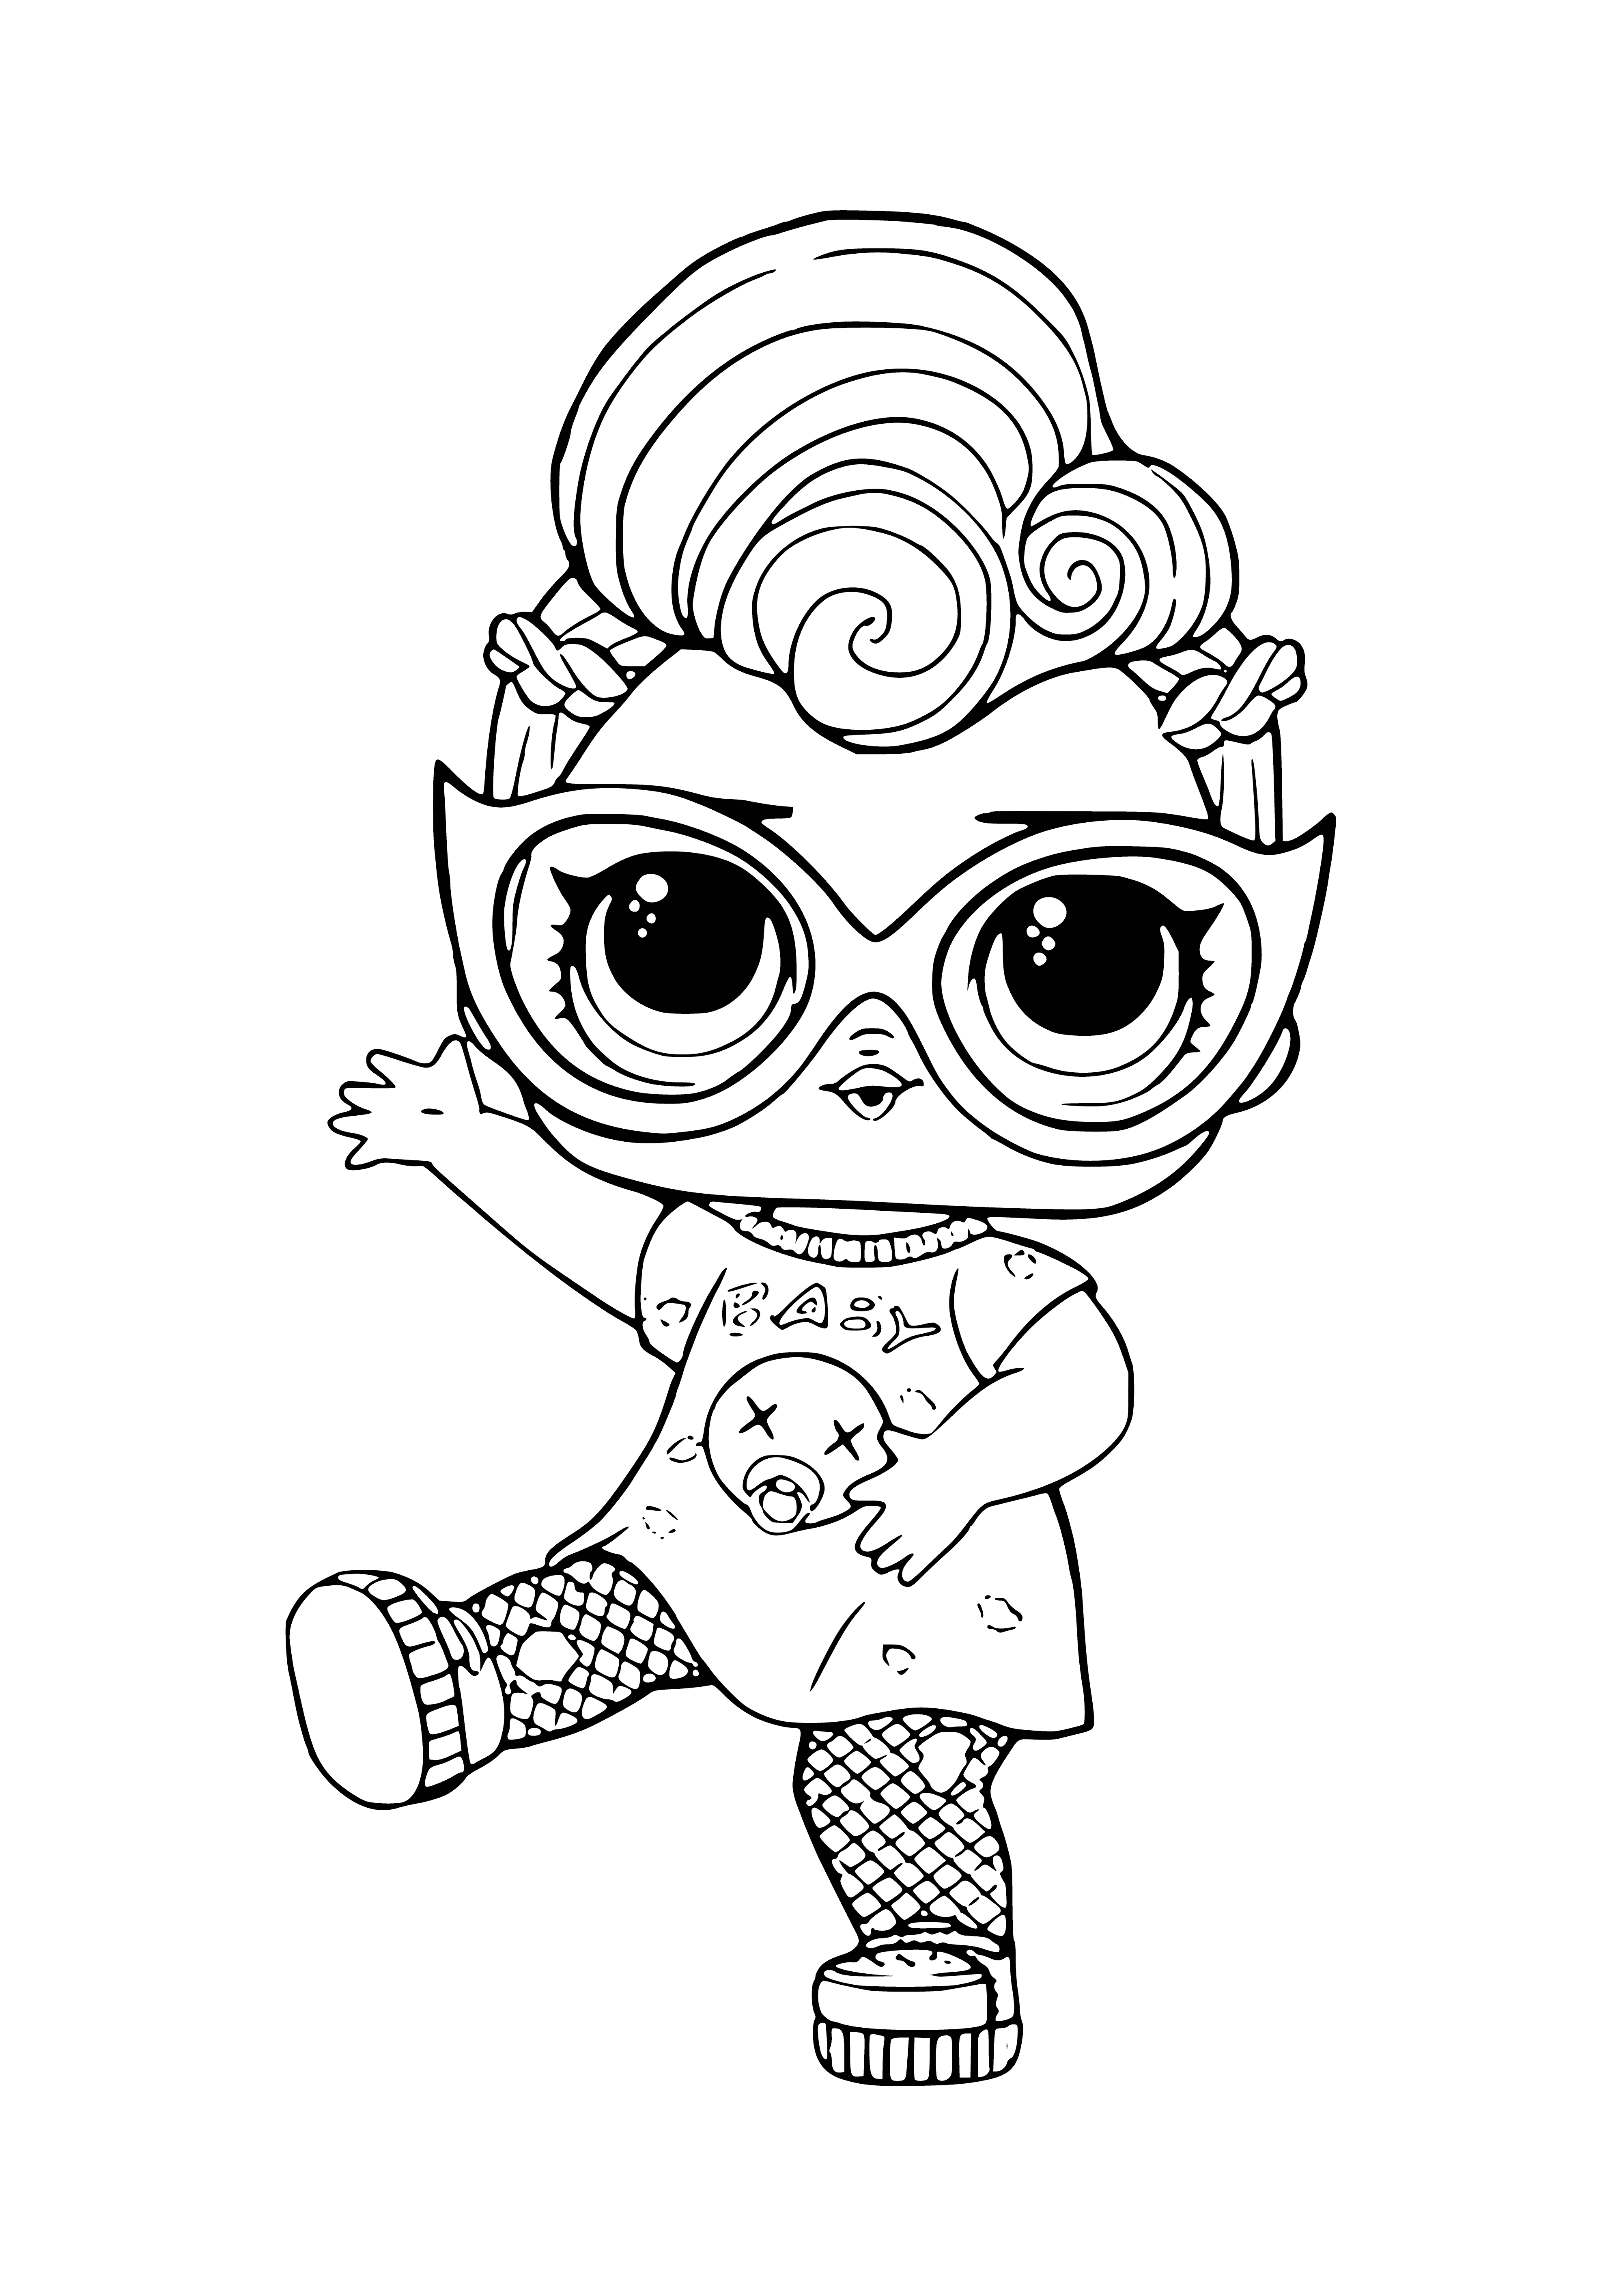 coloring page: The LOL Grunge Grrrl confetti pop adds funky personality to parties with its colorful designs and variety of colors.